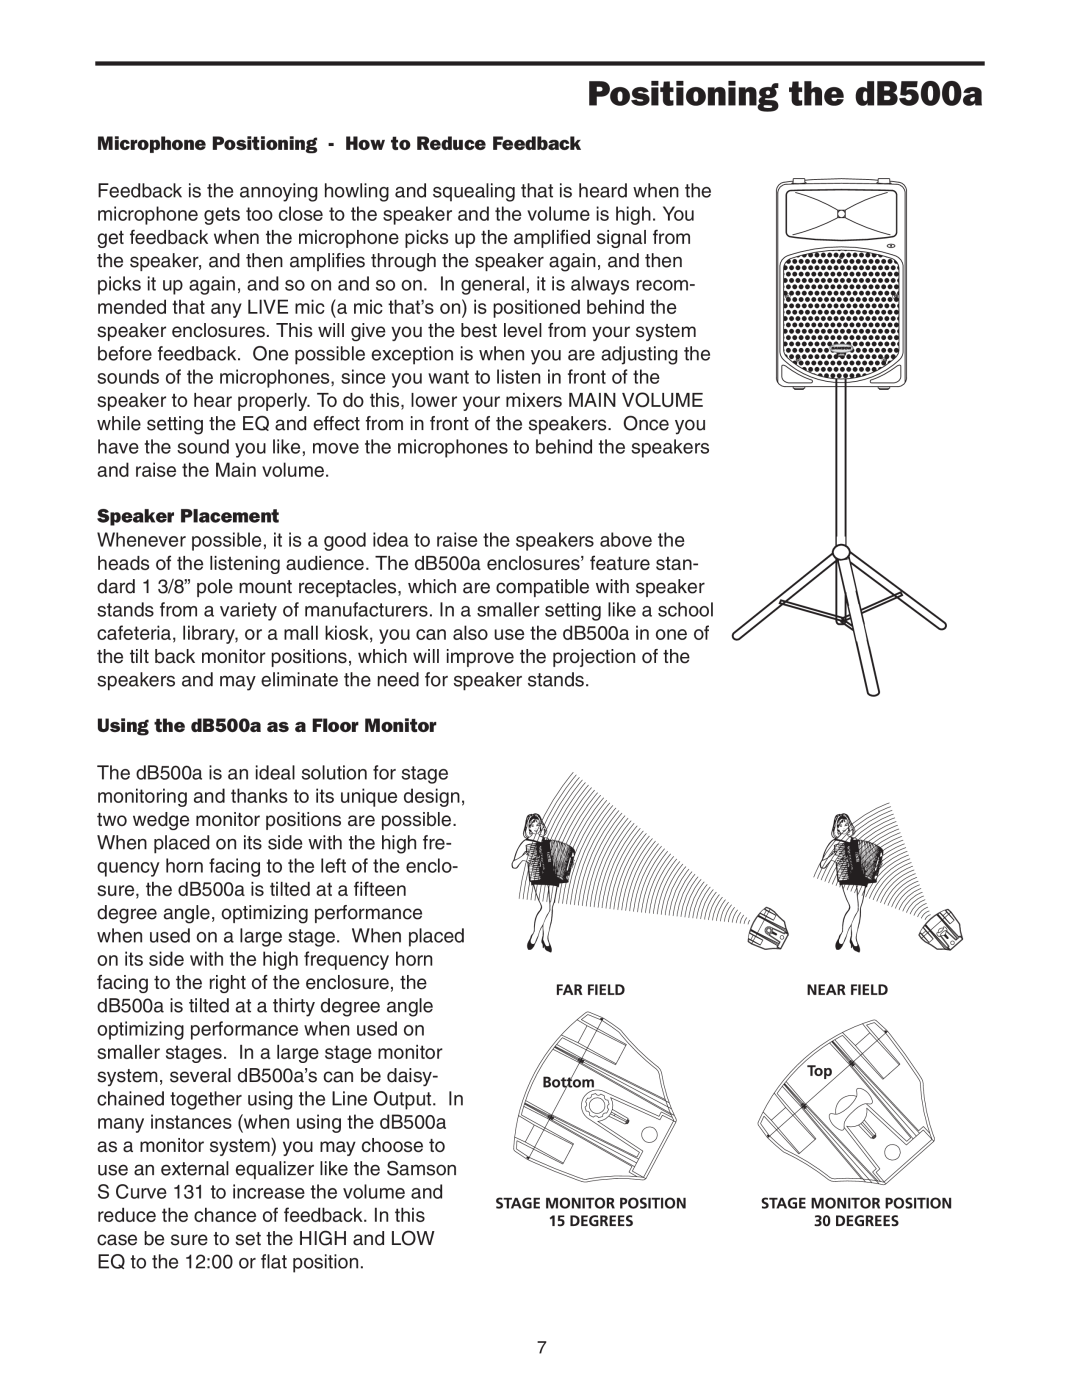 Samson manual Positioning the dB500a, Microphone Positioning - How to Reduce Feedback, Speaker Placement 